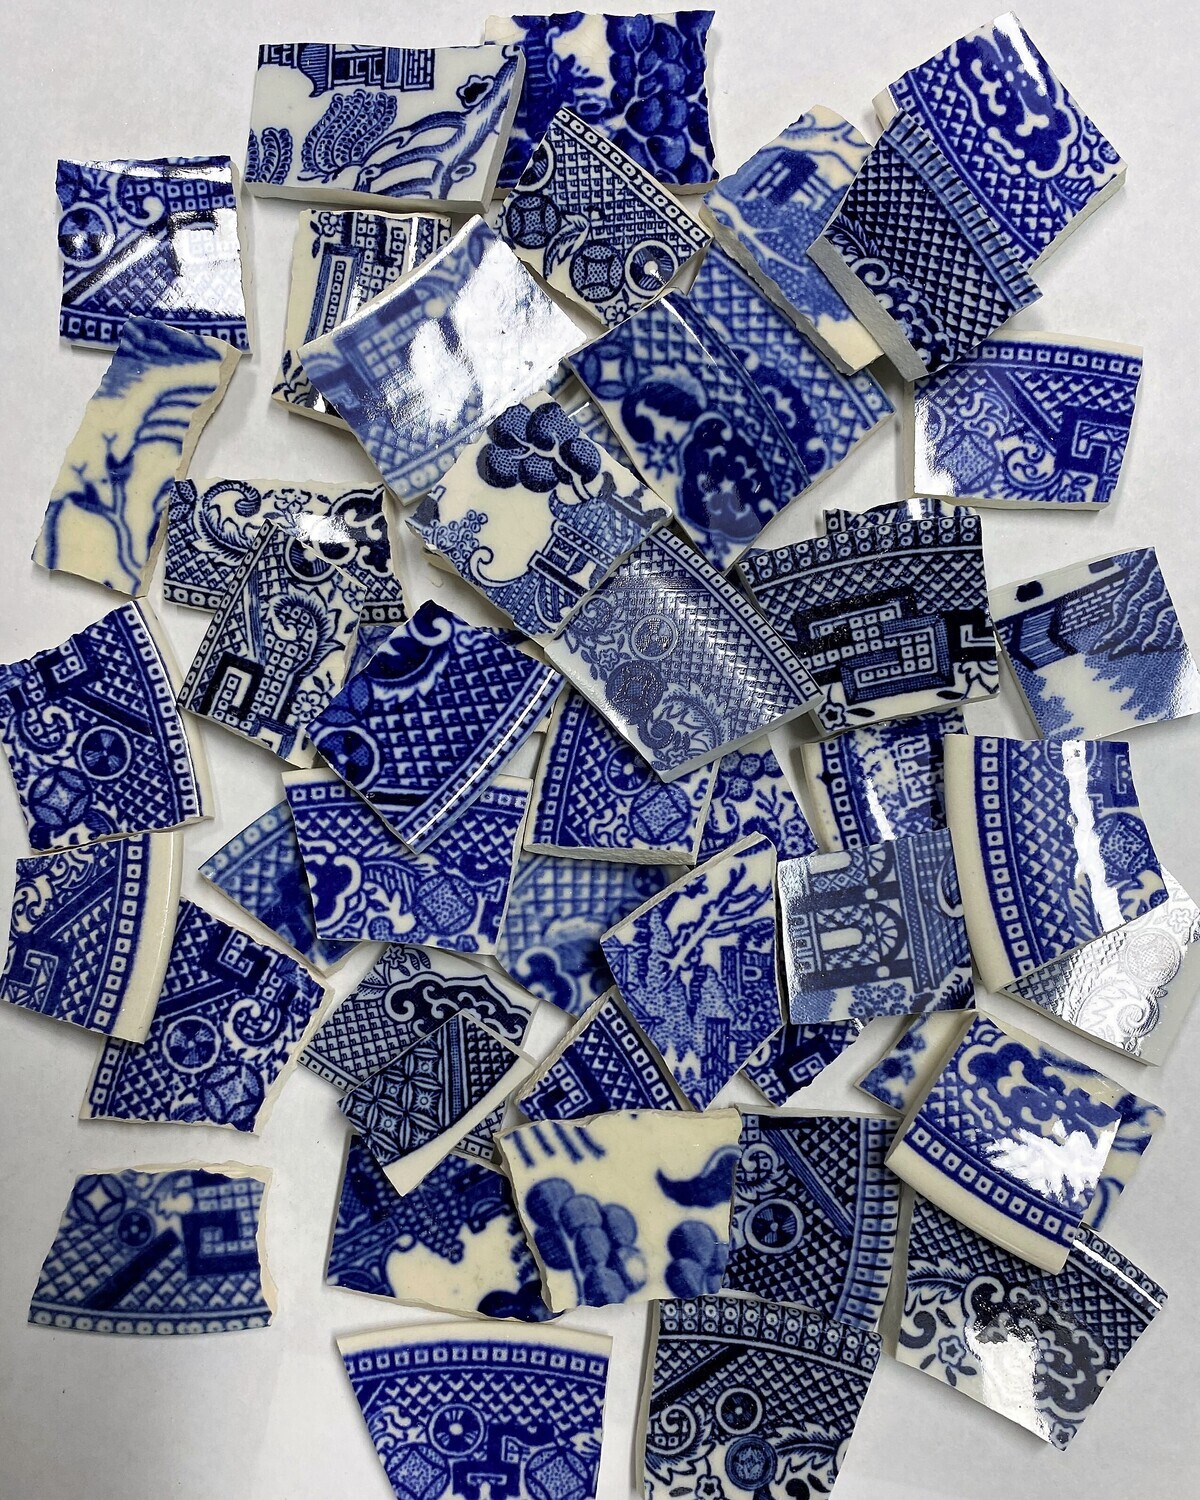 50 Assorted Blue Willow Mosaic Tiles